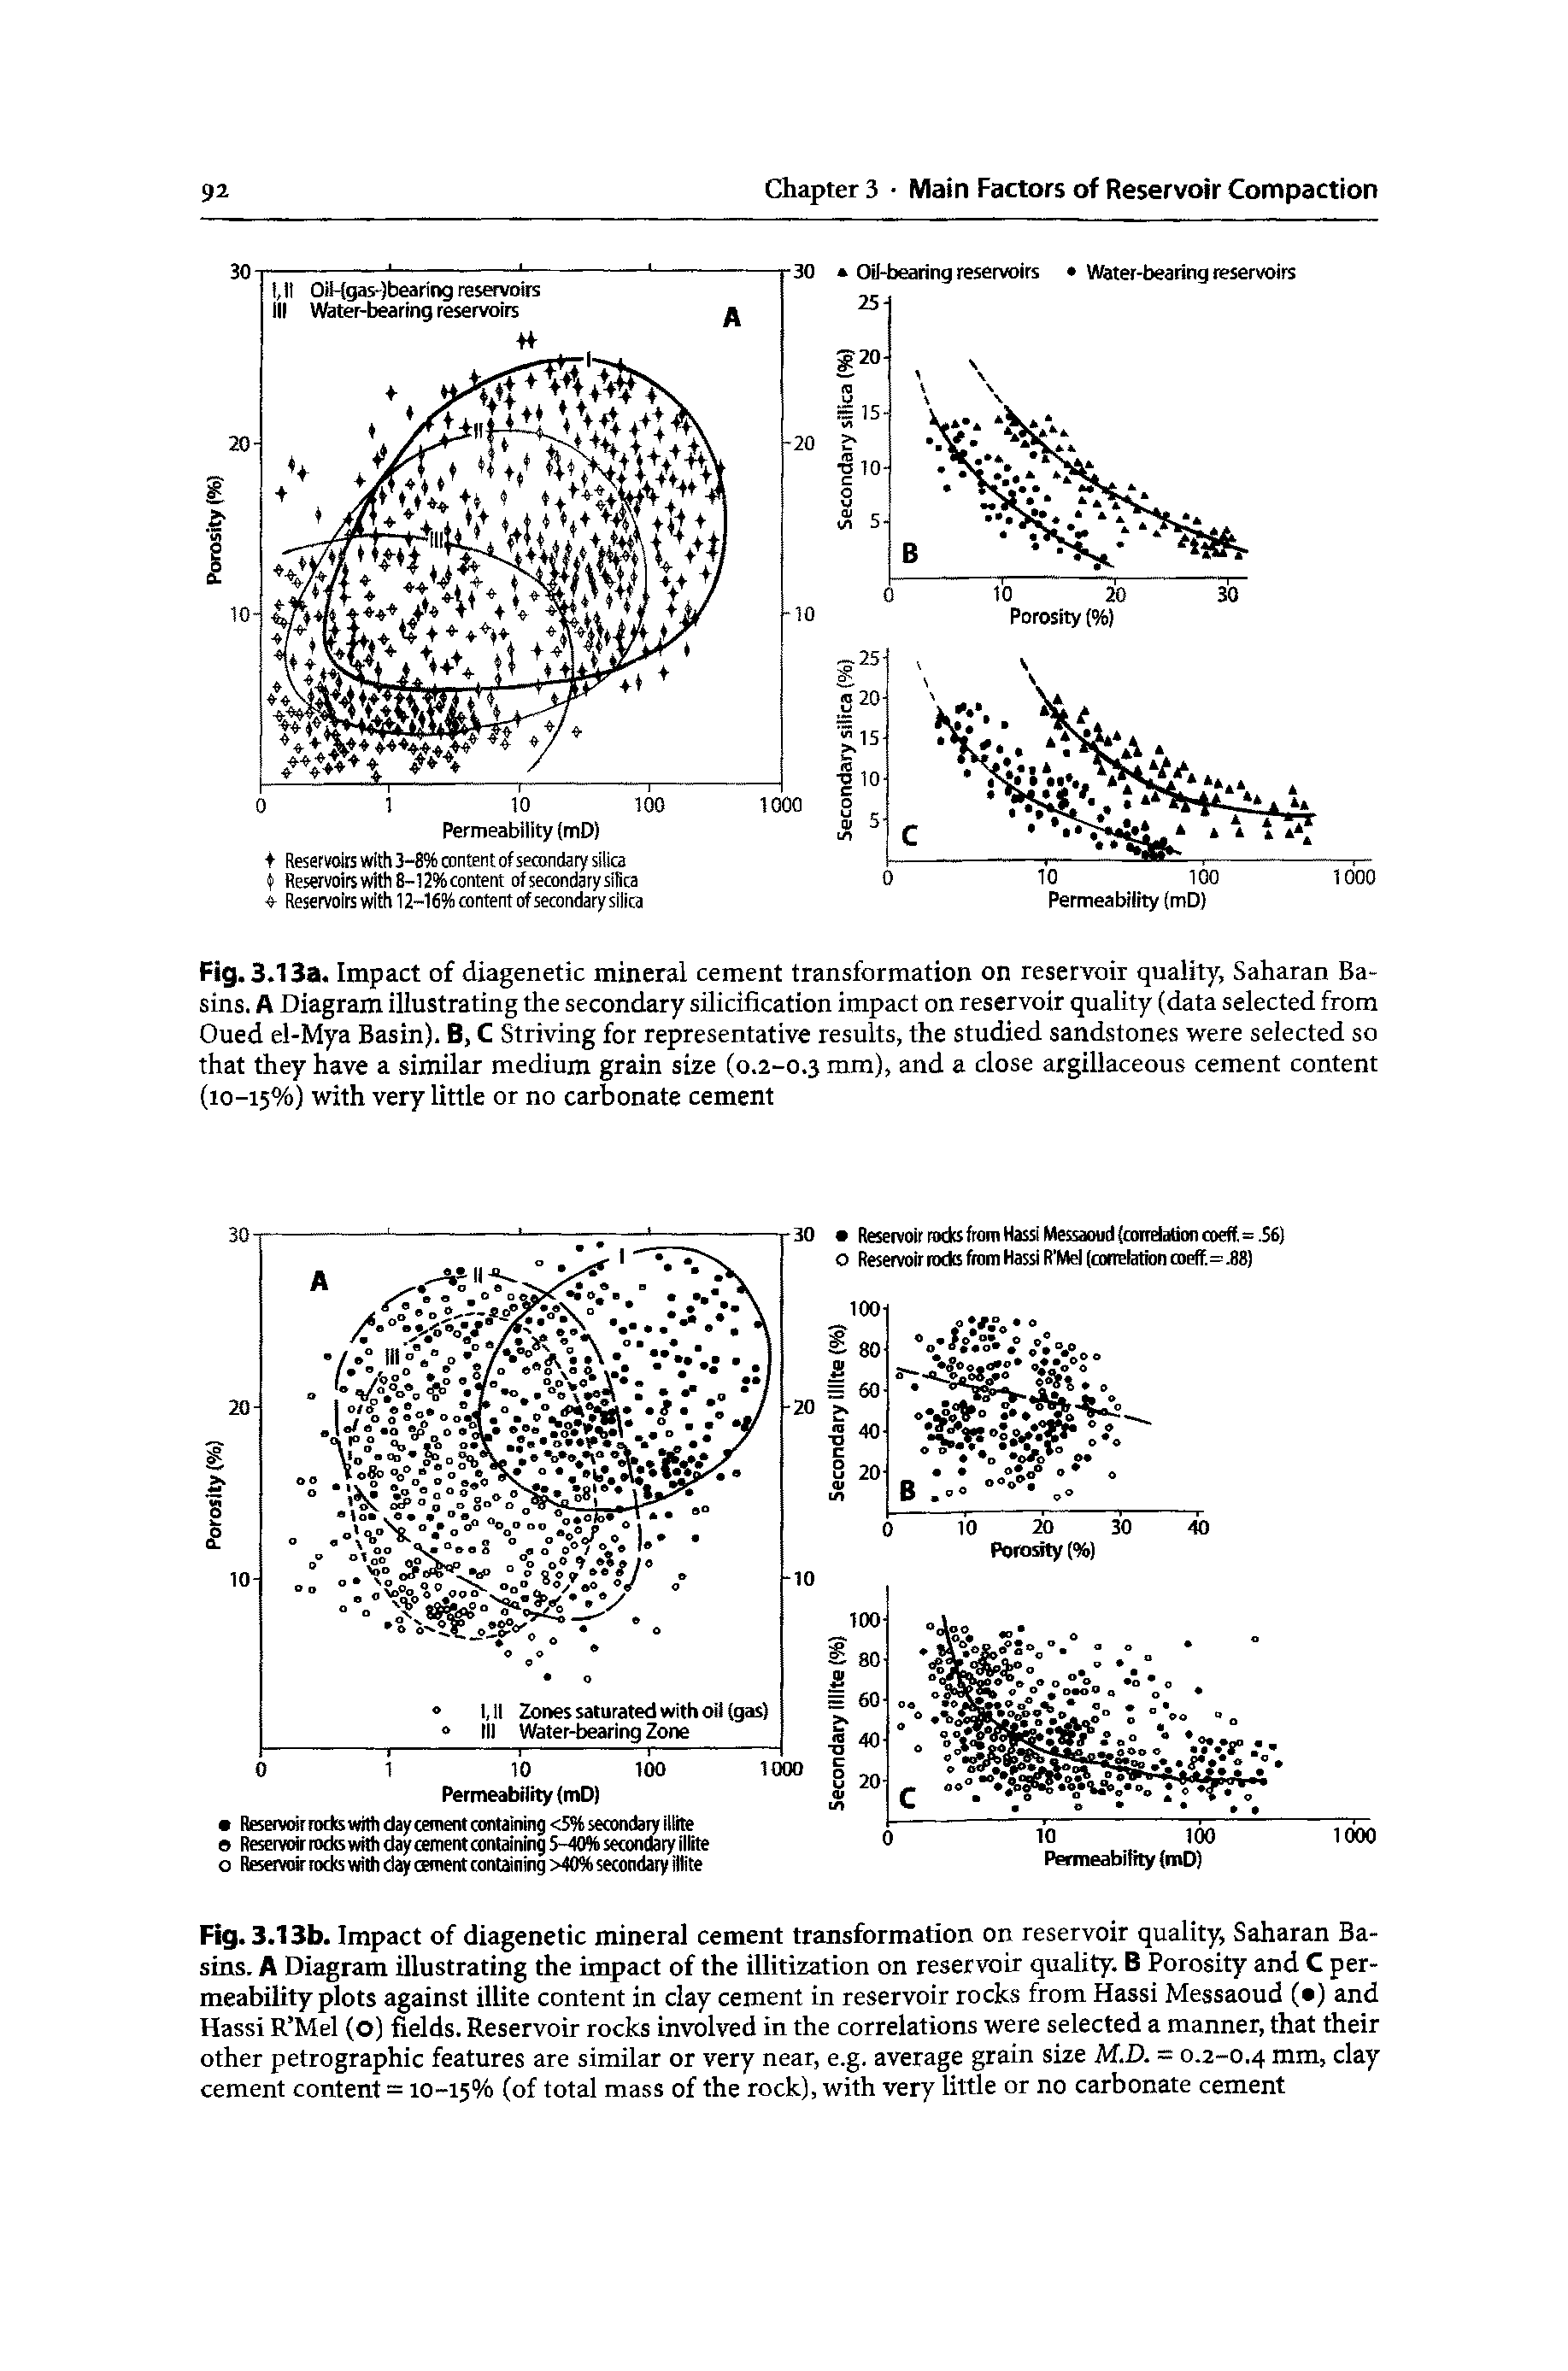 Fig. 3.13a. Impact of diagenetic mineral cement transformation on reservoir quality, Saharan Basins. A Diagram illustrating tlie secondary silicification impact on reservoir quality (data selected from Oued el-Mya Basin). B, C Striving for representative results, the studied sandstones were selected so that they have a similar medium grain size (0.2-0.3 mm), and a close argillaceous cement content (10-15%) with very little or no carbonate cement...